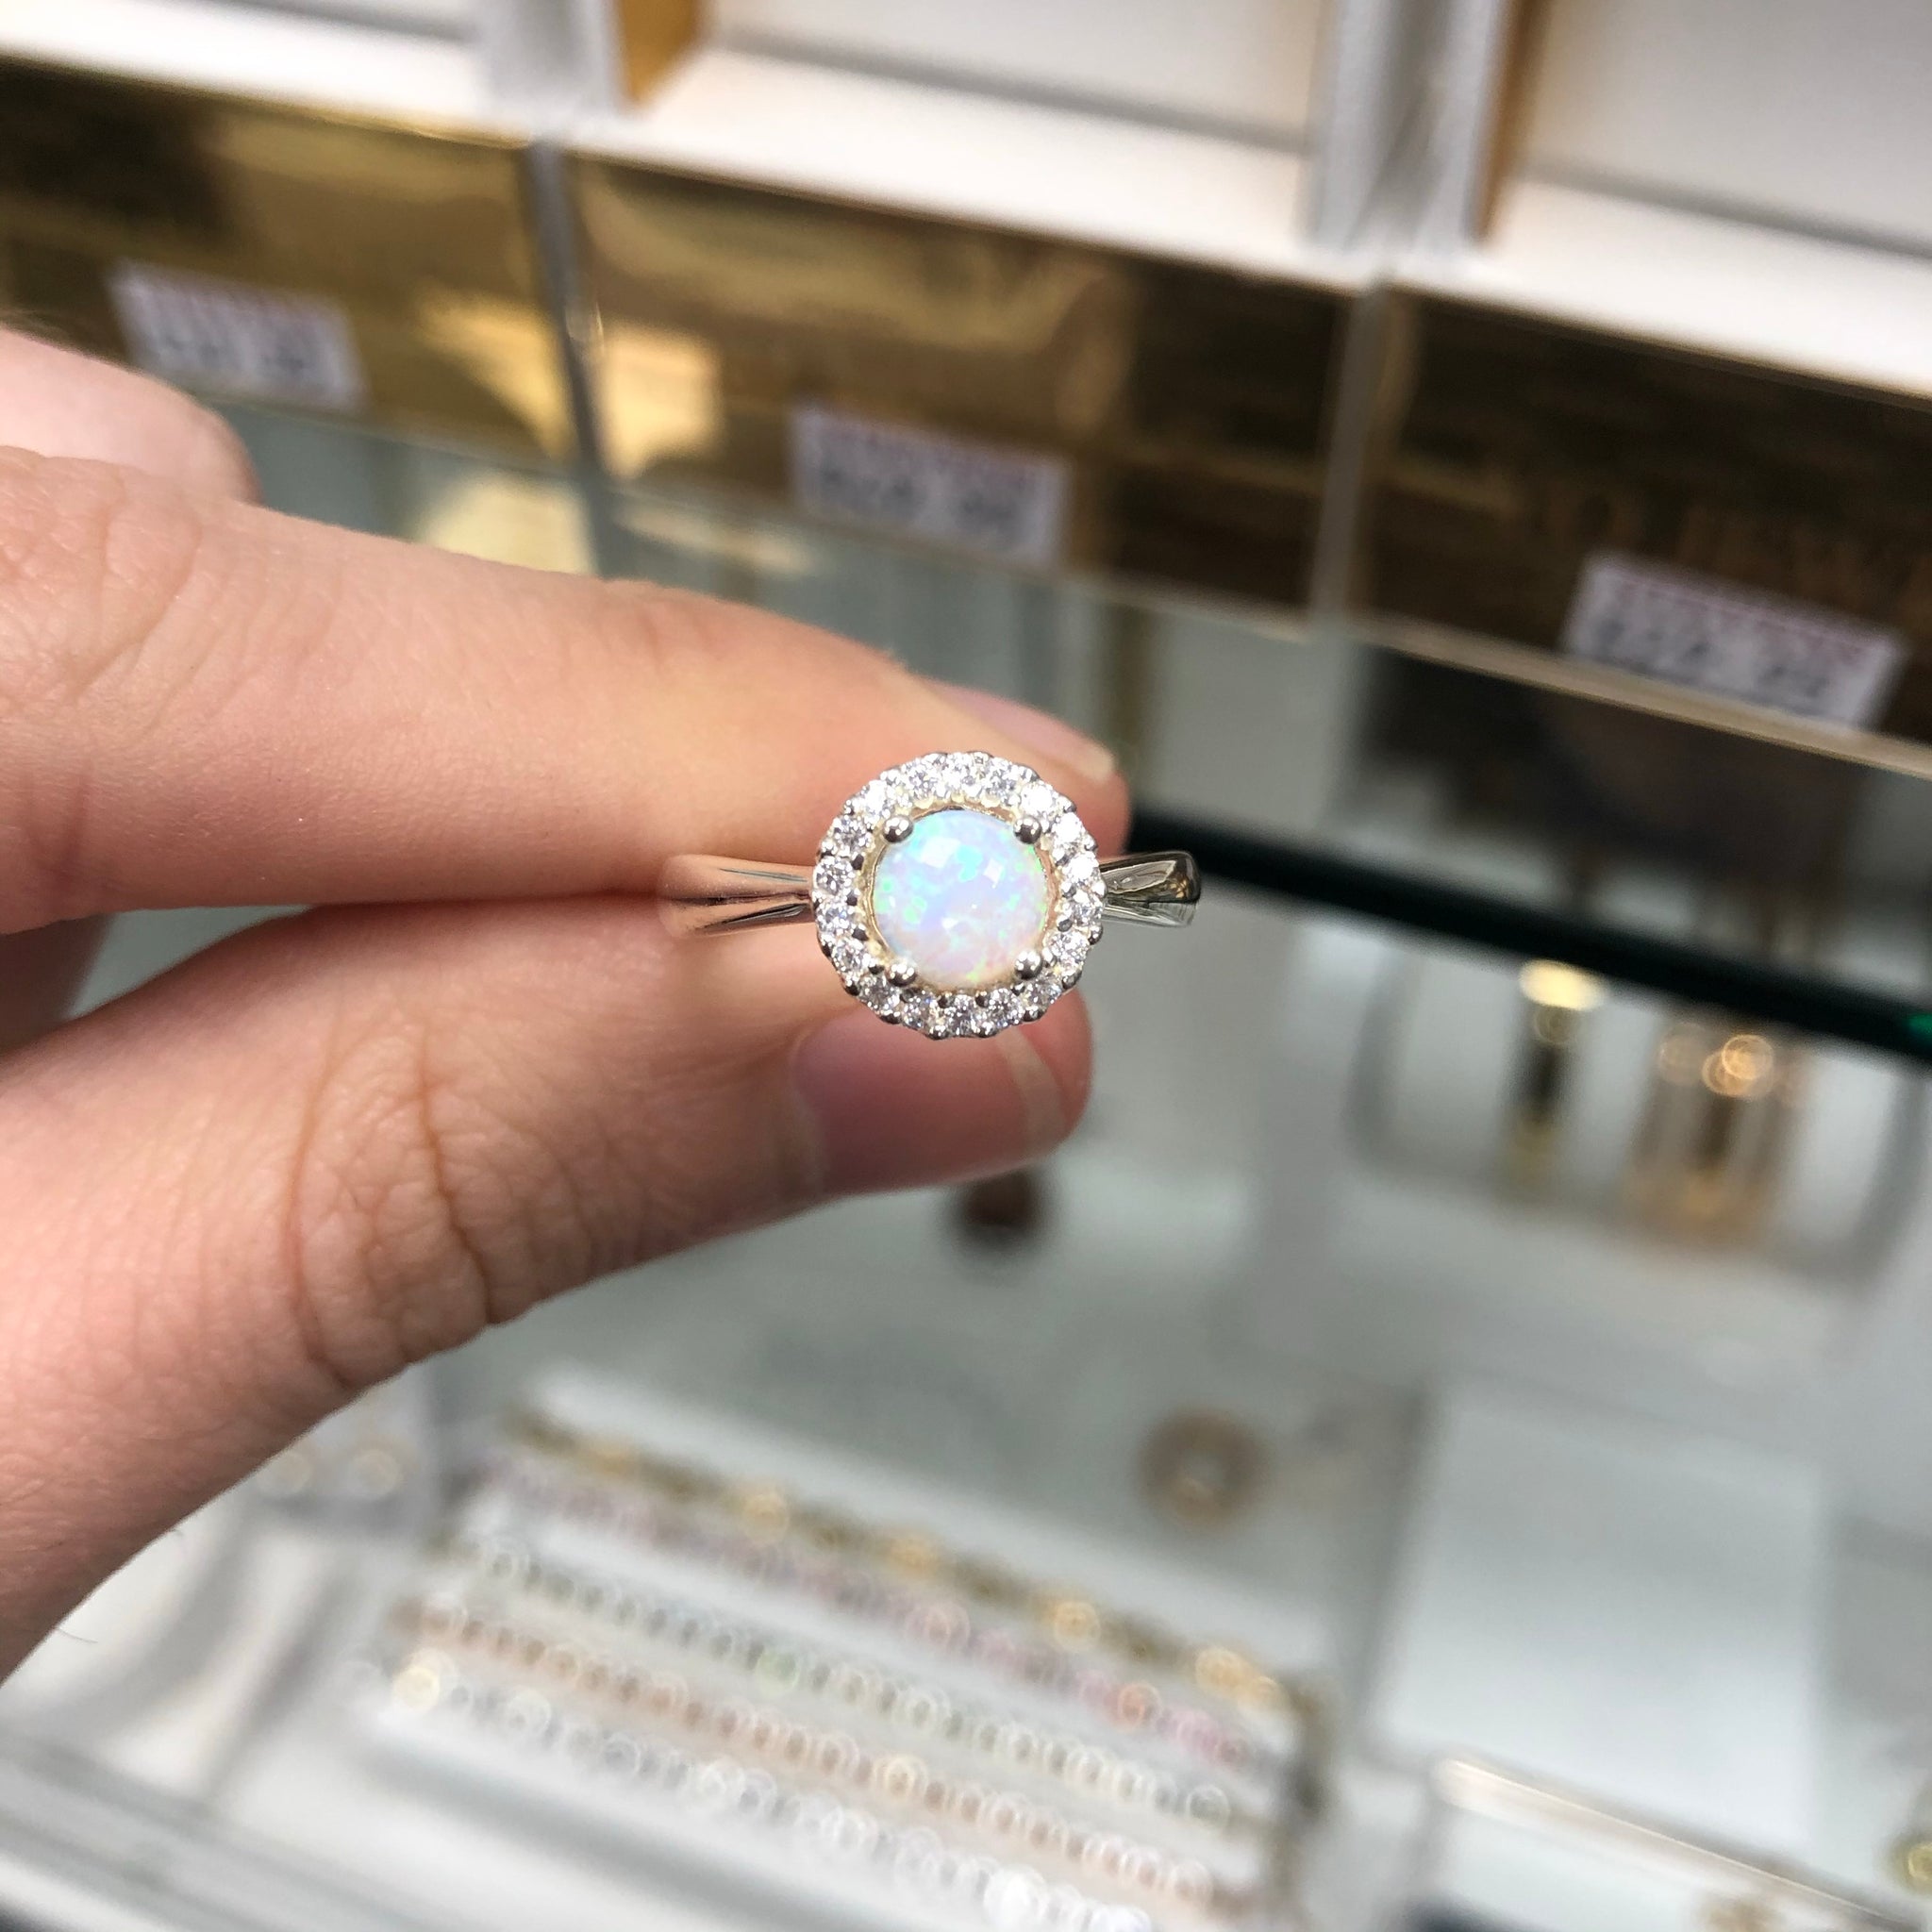 Sterling Silver Round Opal Ring